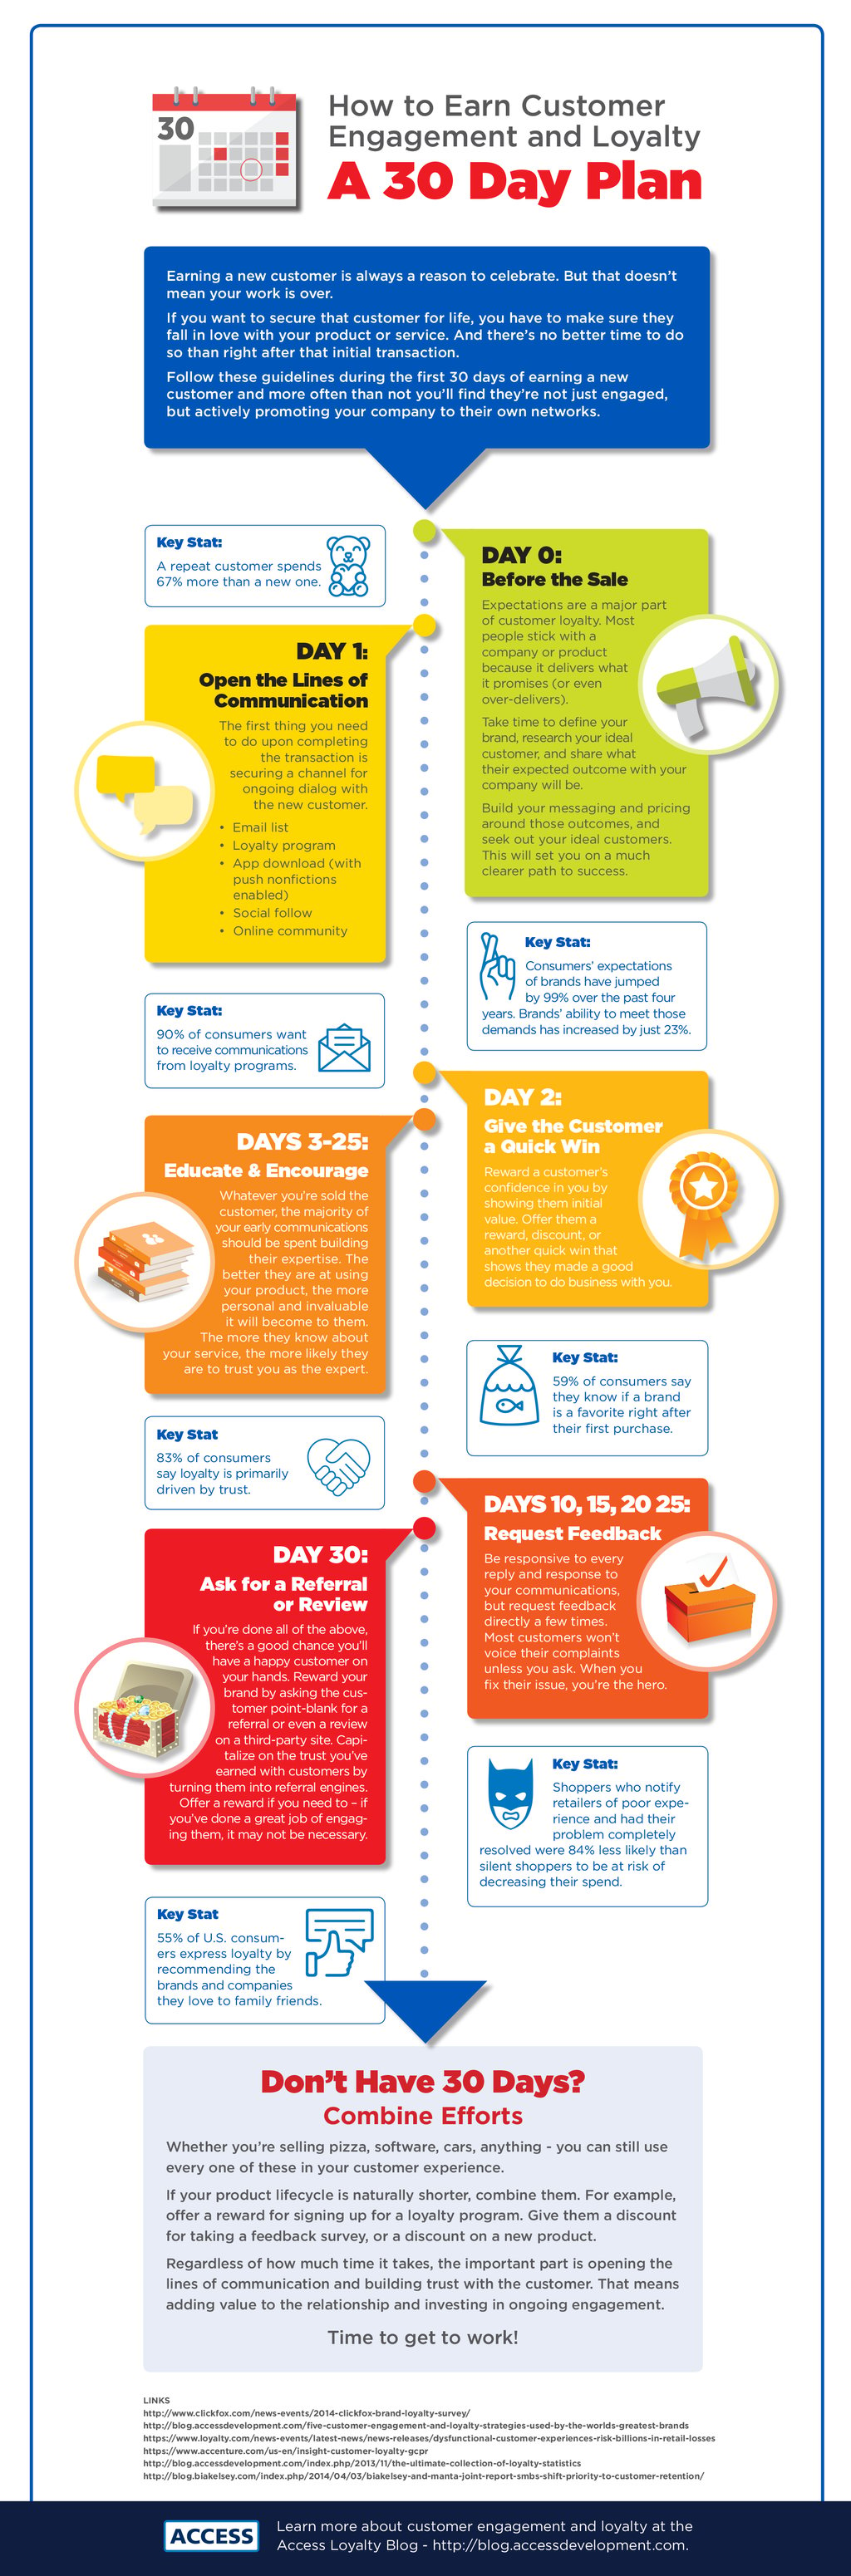 Access 30 Days to Customer Loyalty Infographic.png